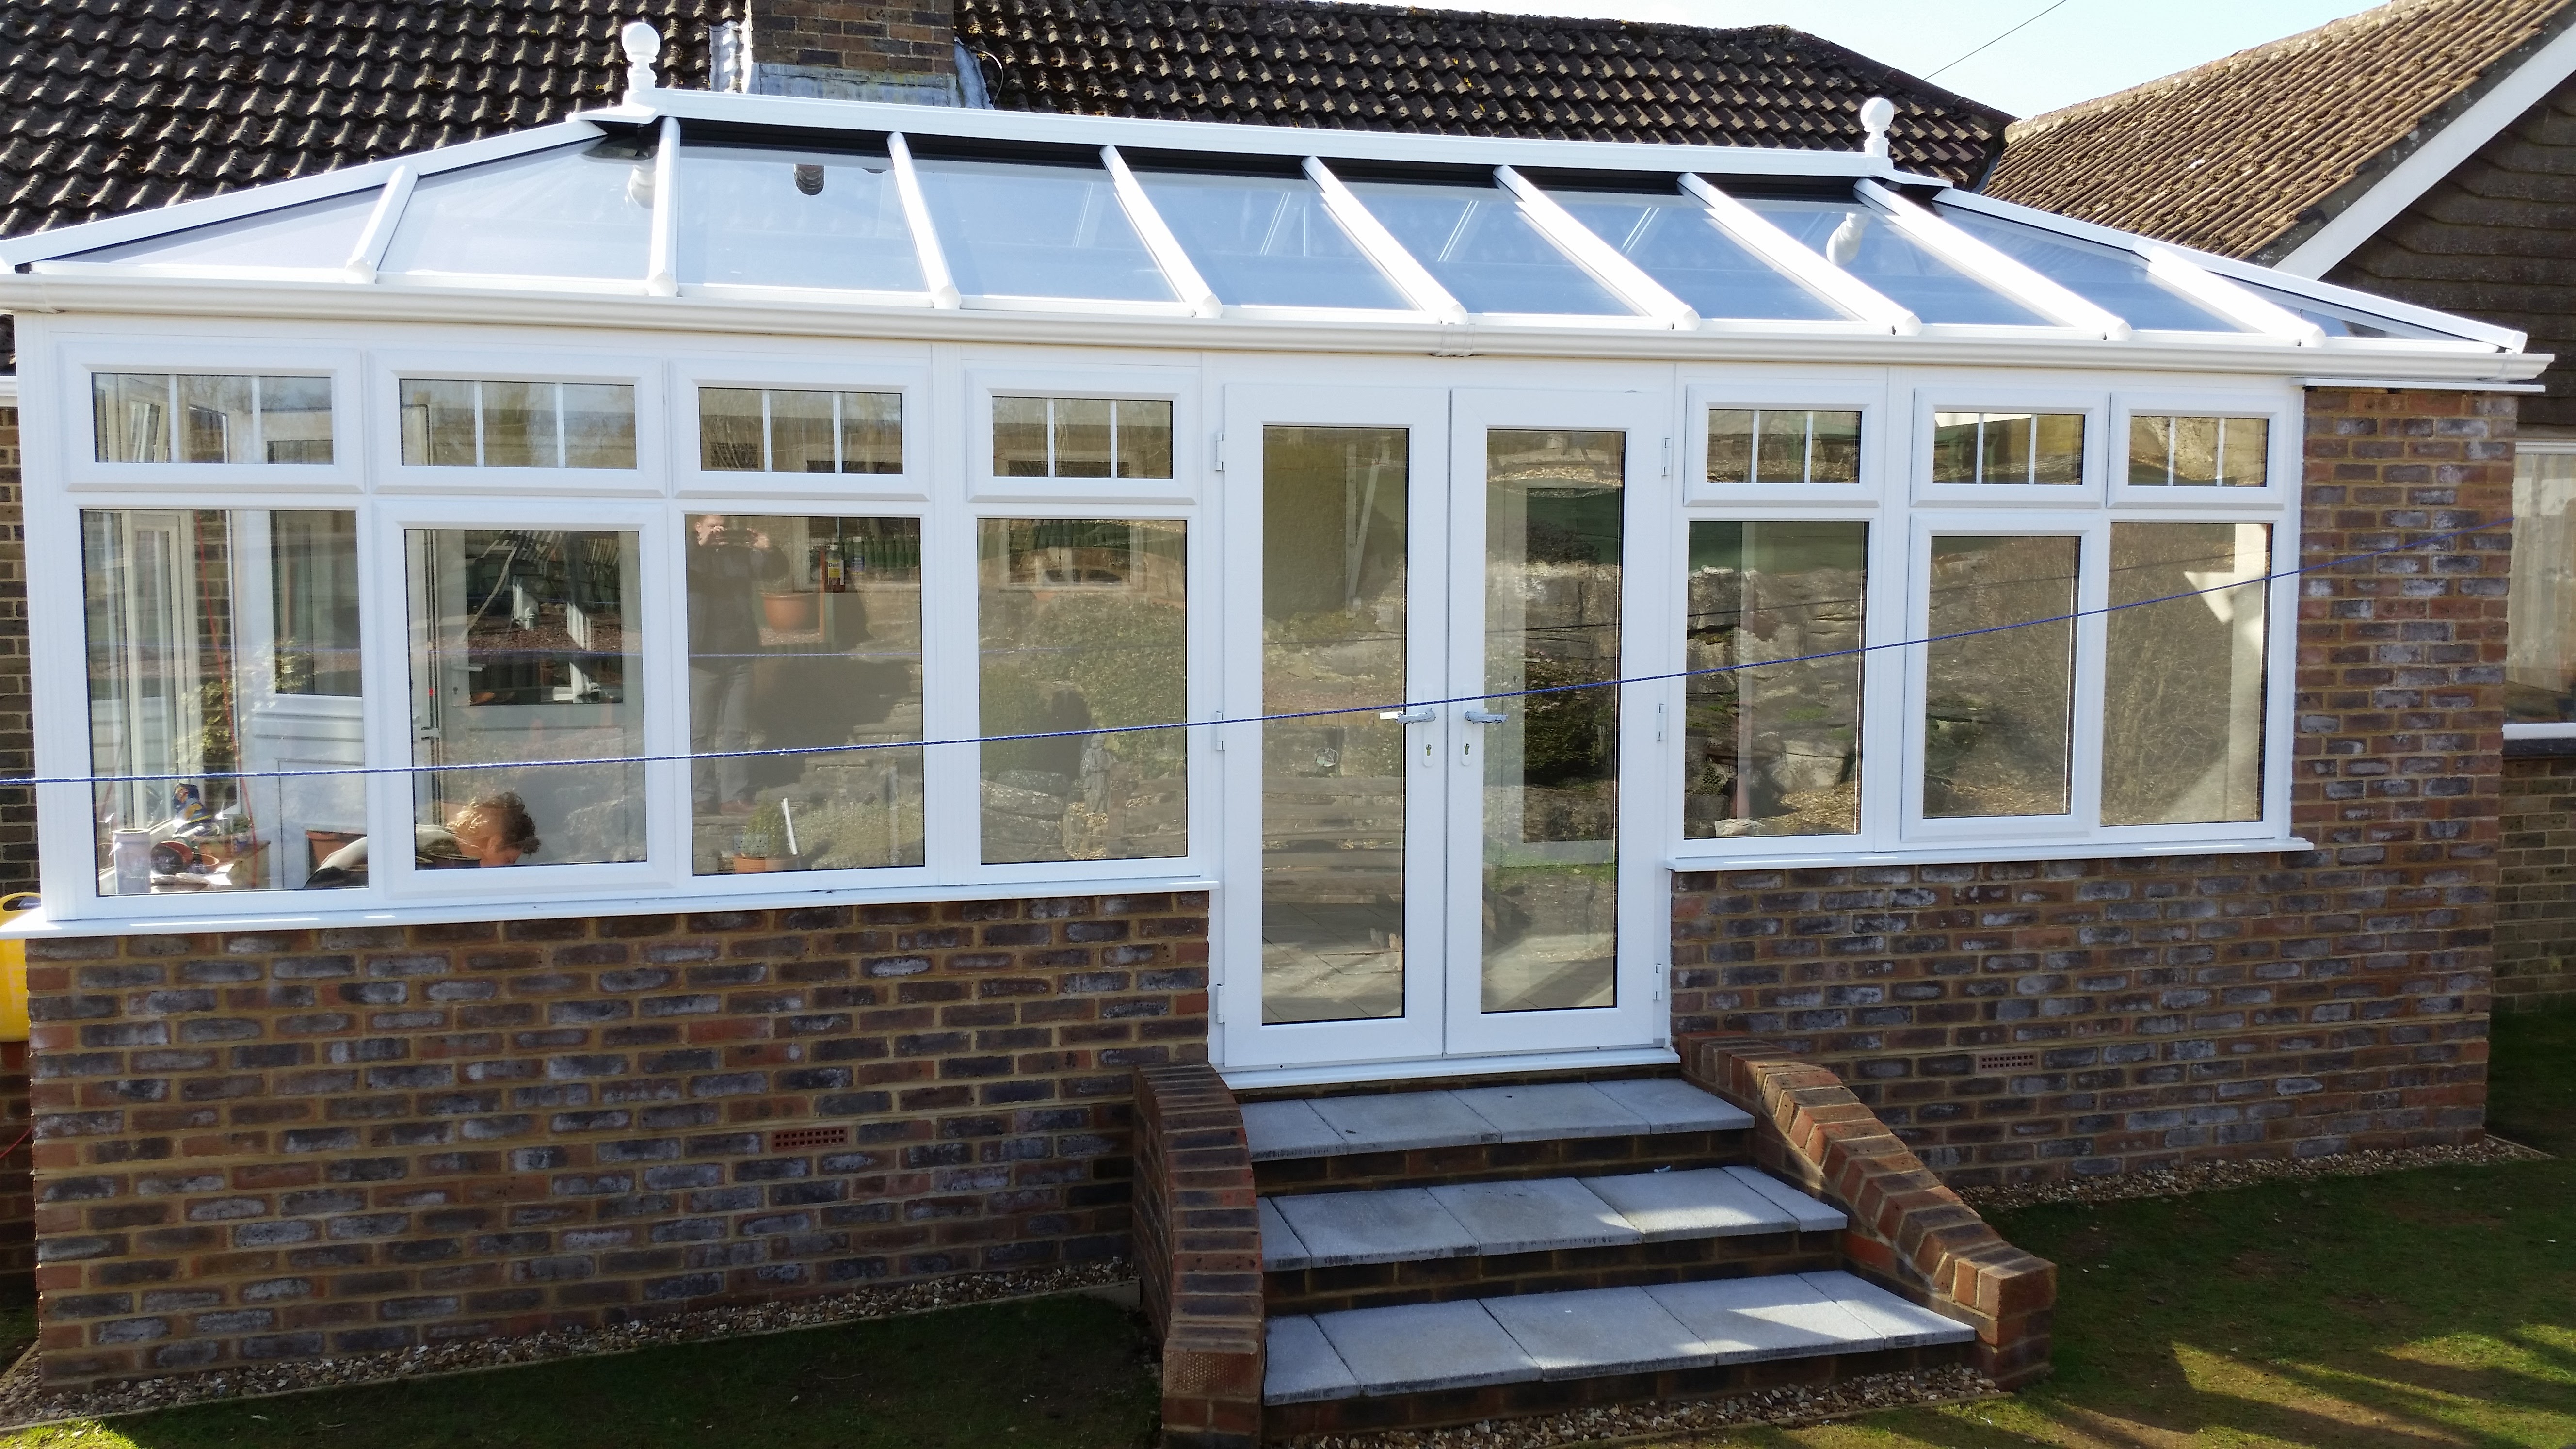 View of a Livin room conservatory installation.